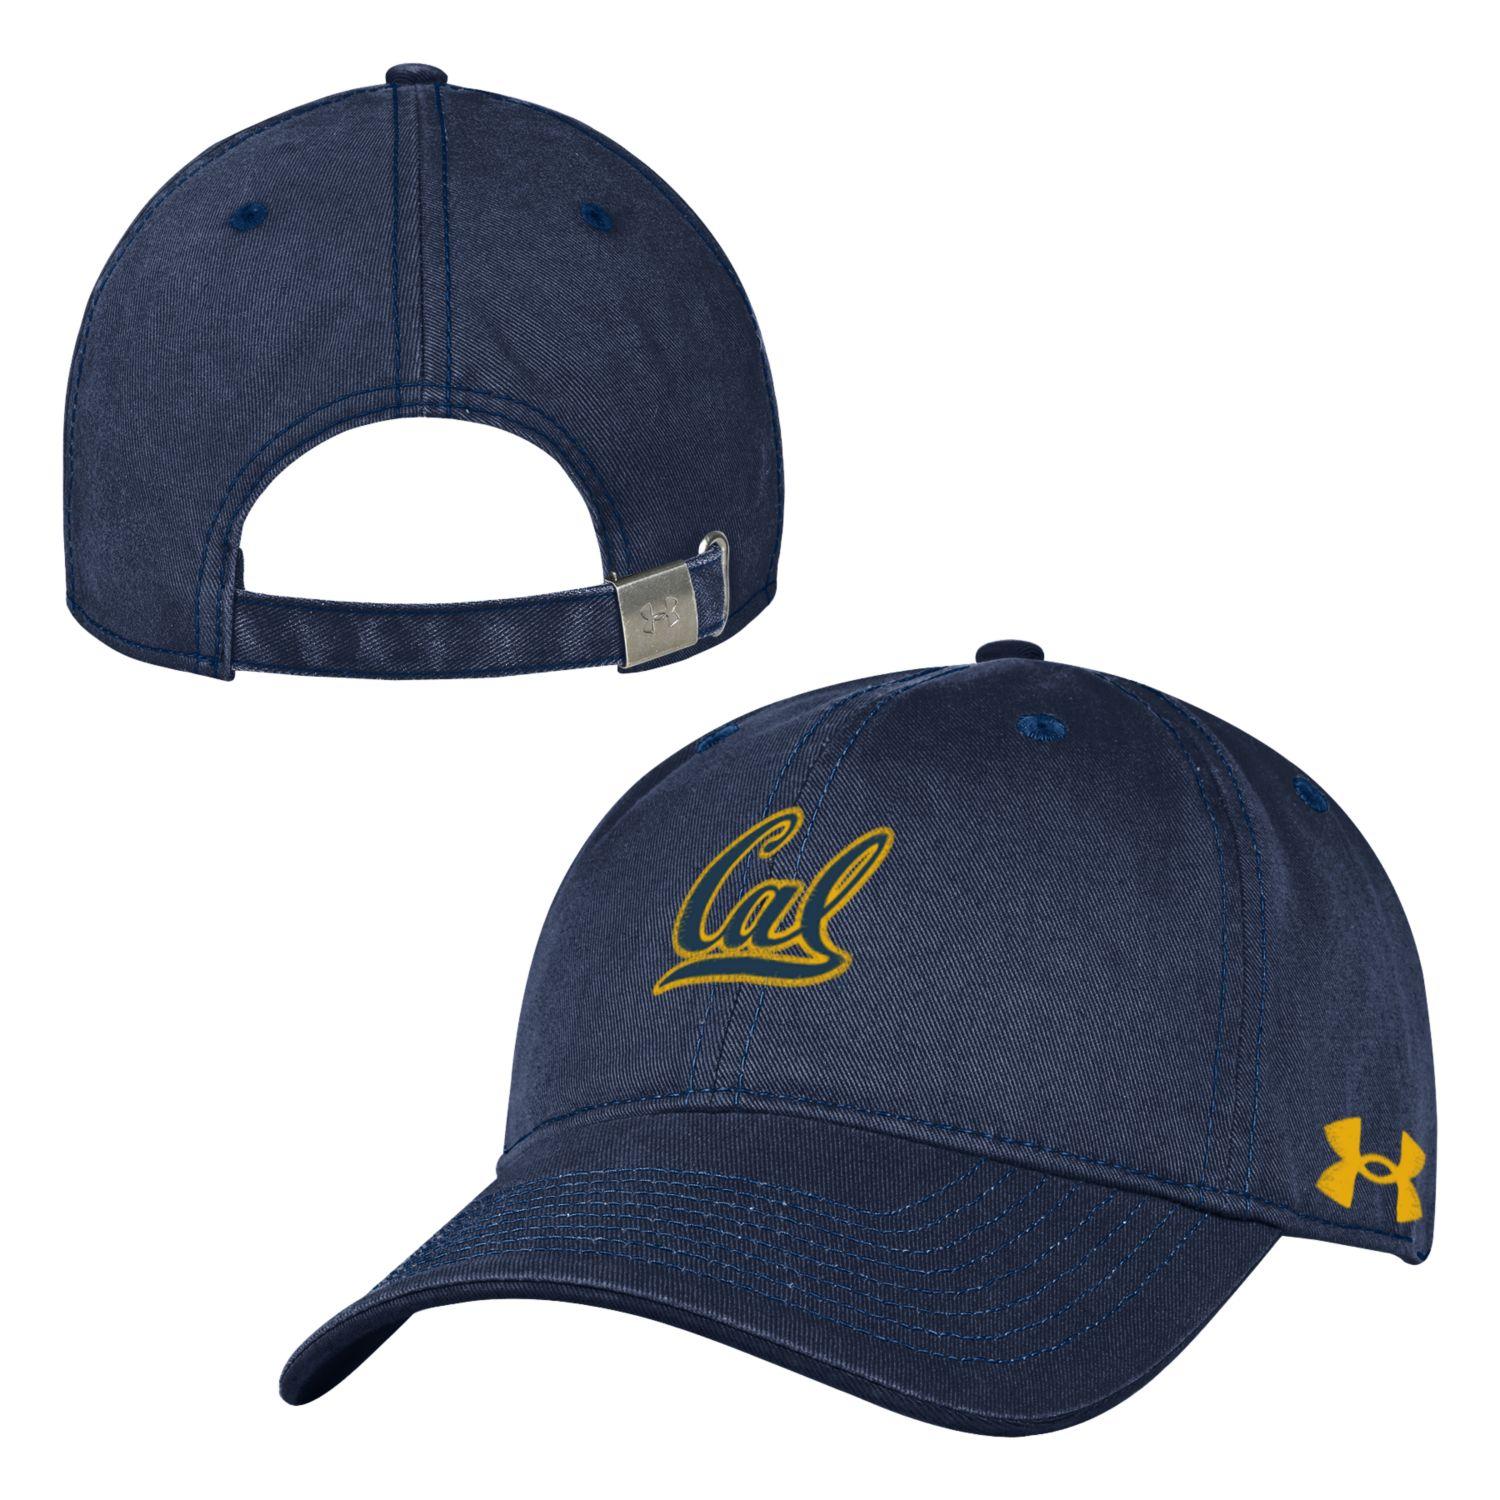 U.C. Berkeley 2"Cal embroidered Under Armour performance cotton hat-Navy-Shop College Wear